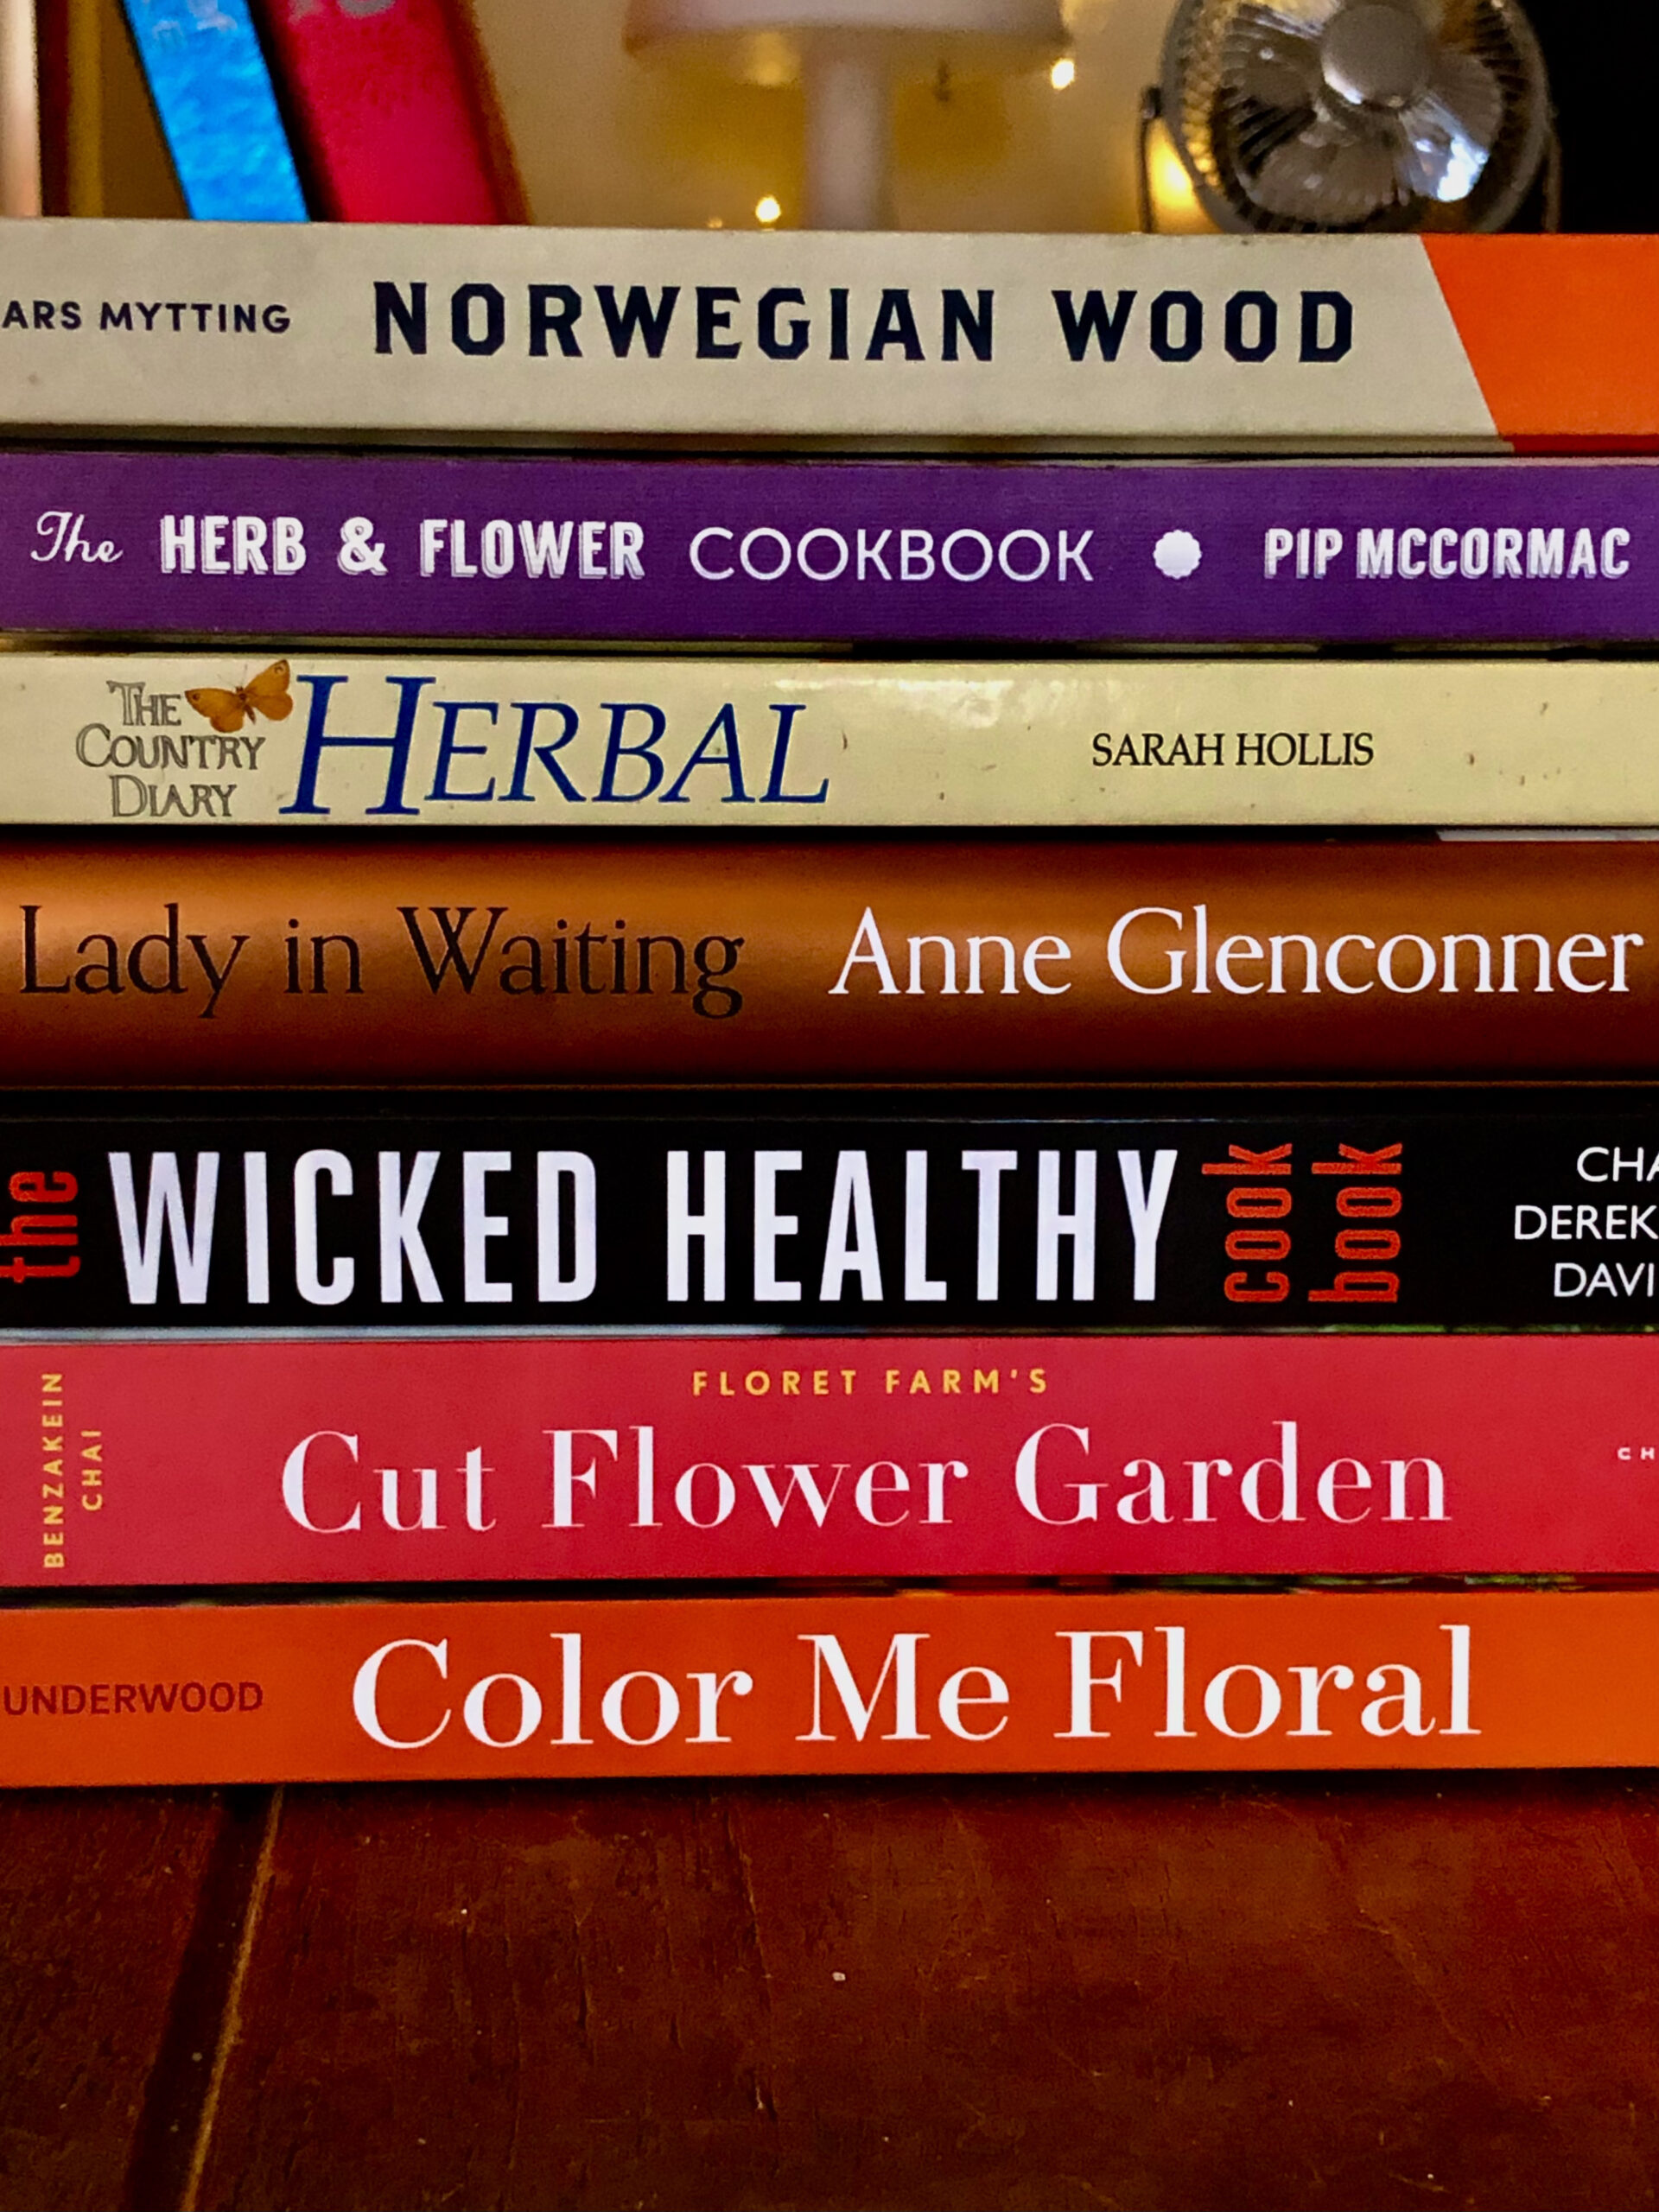 Selection of floral garden books and recipe books stacked in garden designers working studio